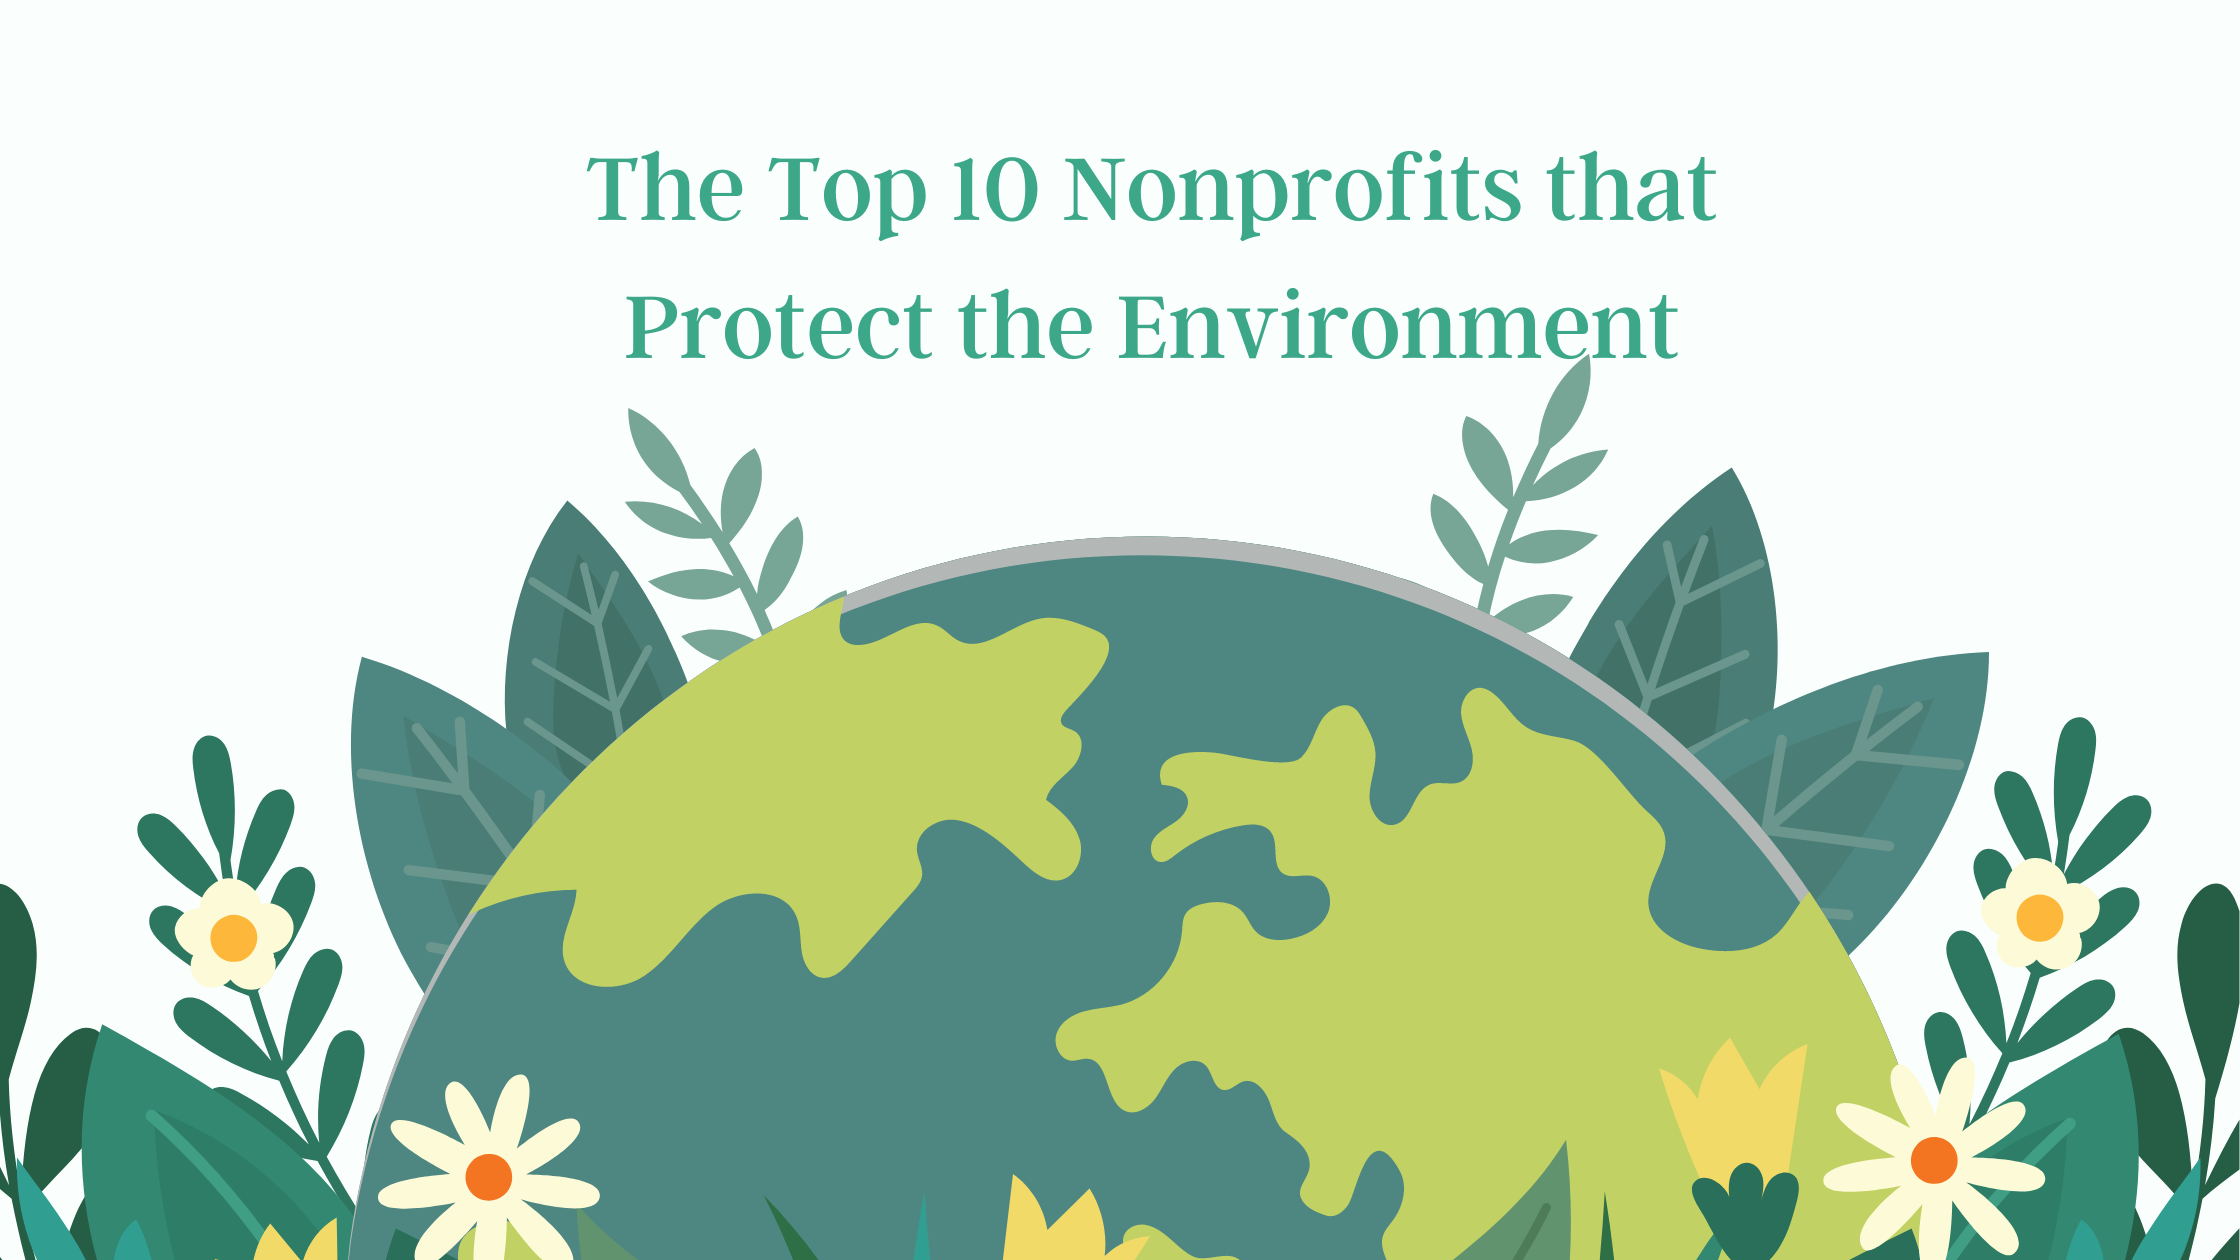 Top 23 Global Nonprofits Protecting the Environment